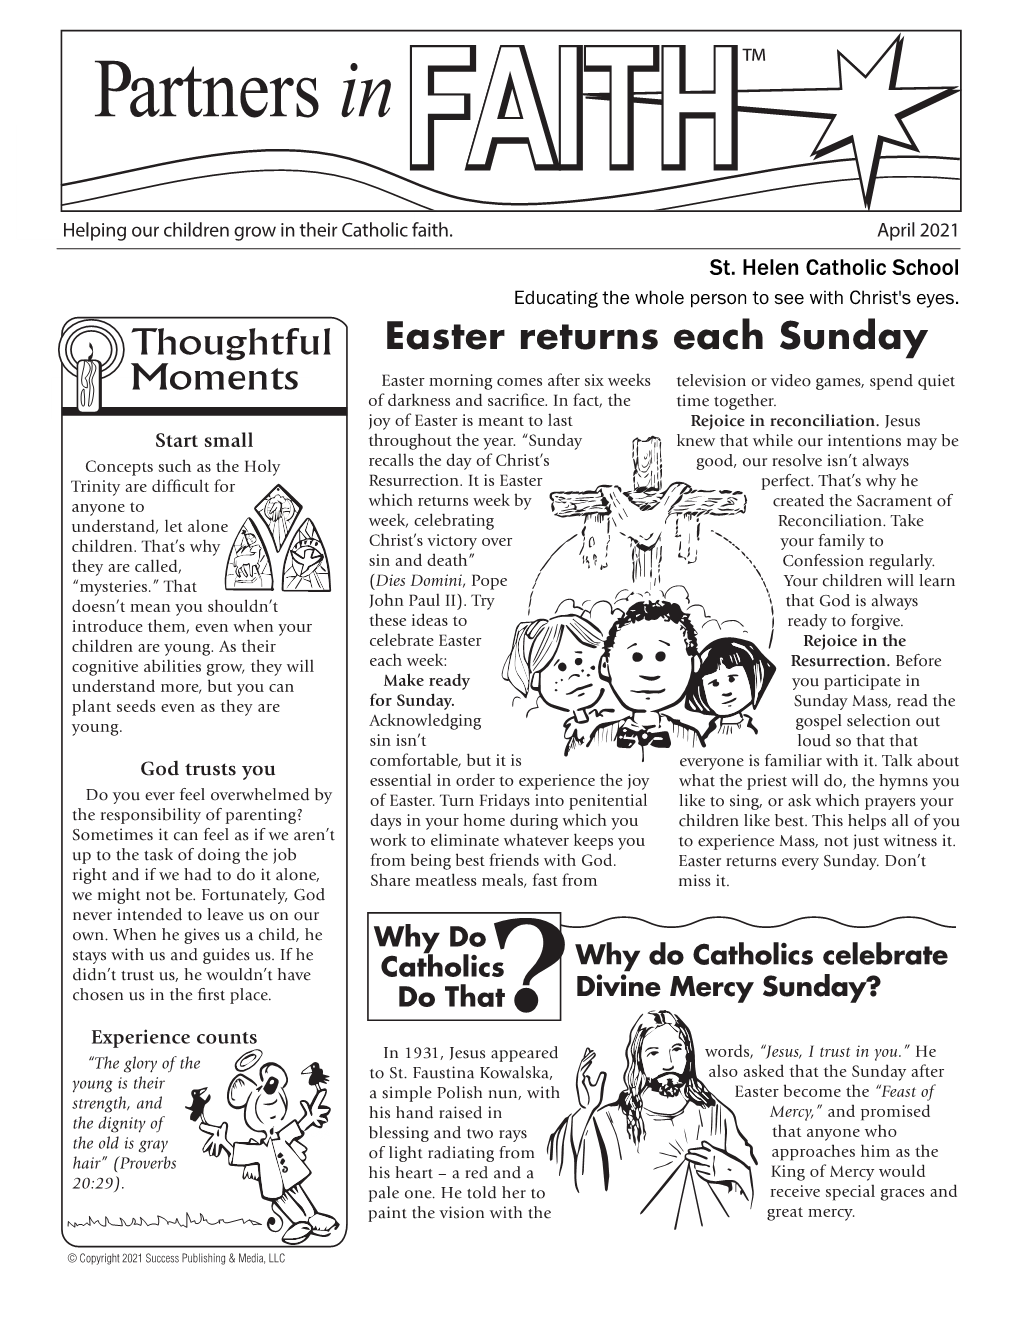 Easter Returns Each Sunday Easter Morning Comes After Six Weeks Television Or Video Games, Spend Quiet of Darkness and Sacri Ce